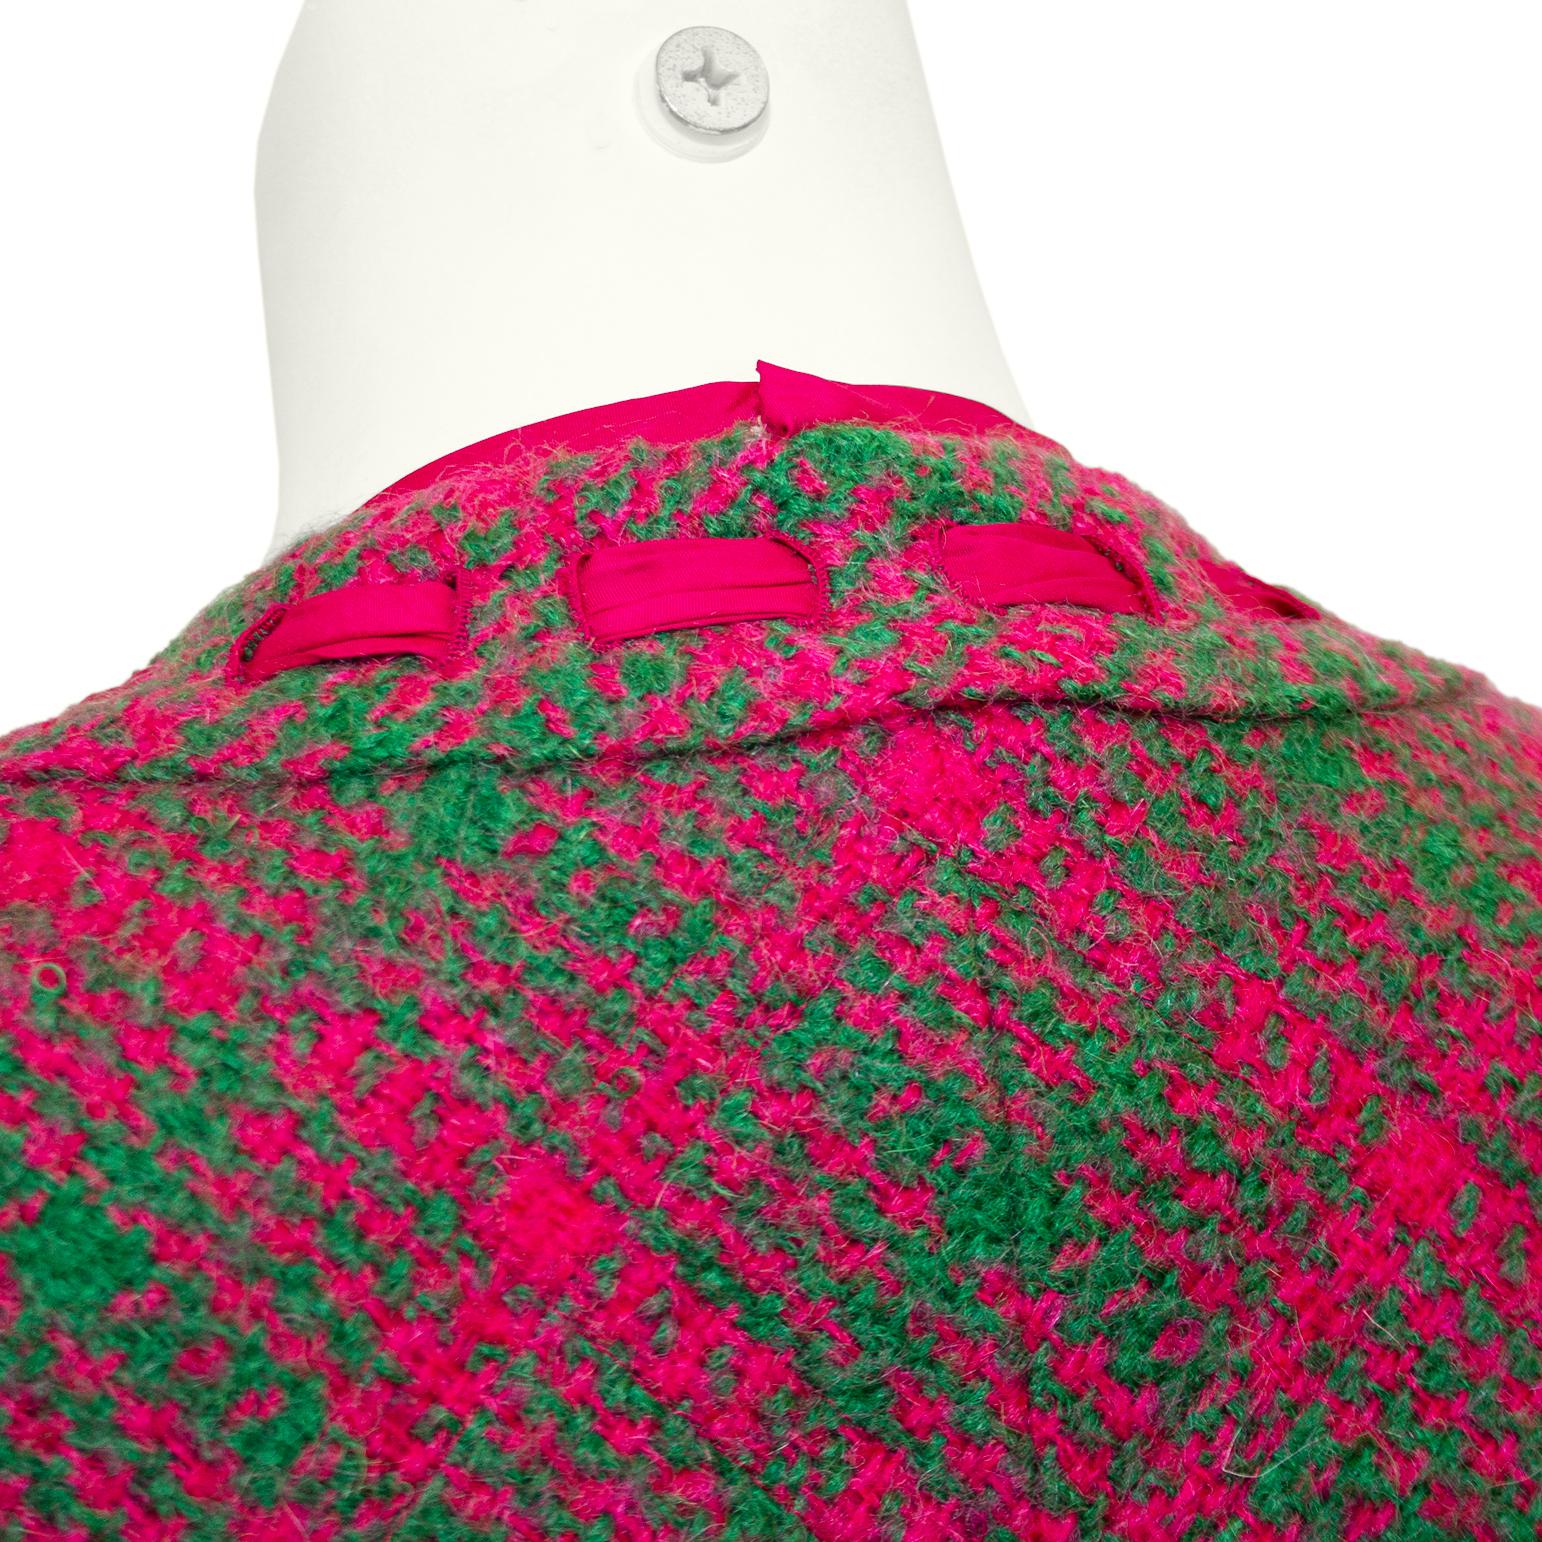 1960s Chanel Haute Couture Magenta and Green Dress and Jacket Ensemble For Sale 3